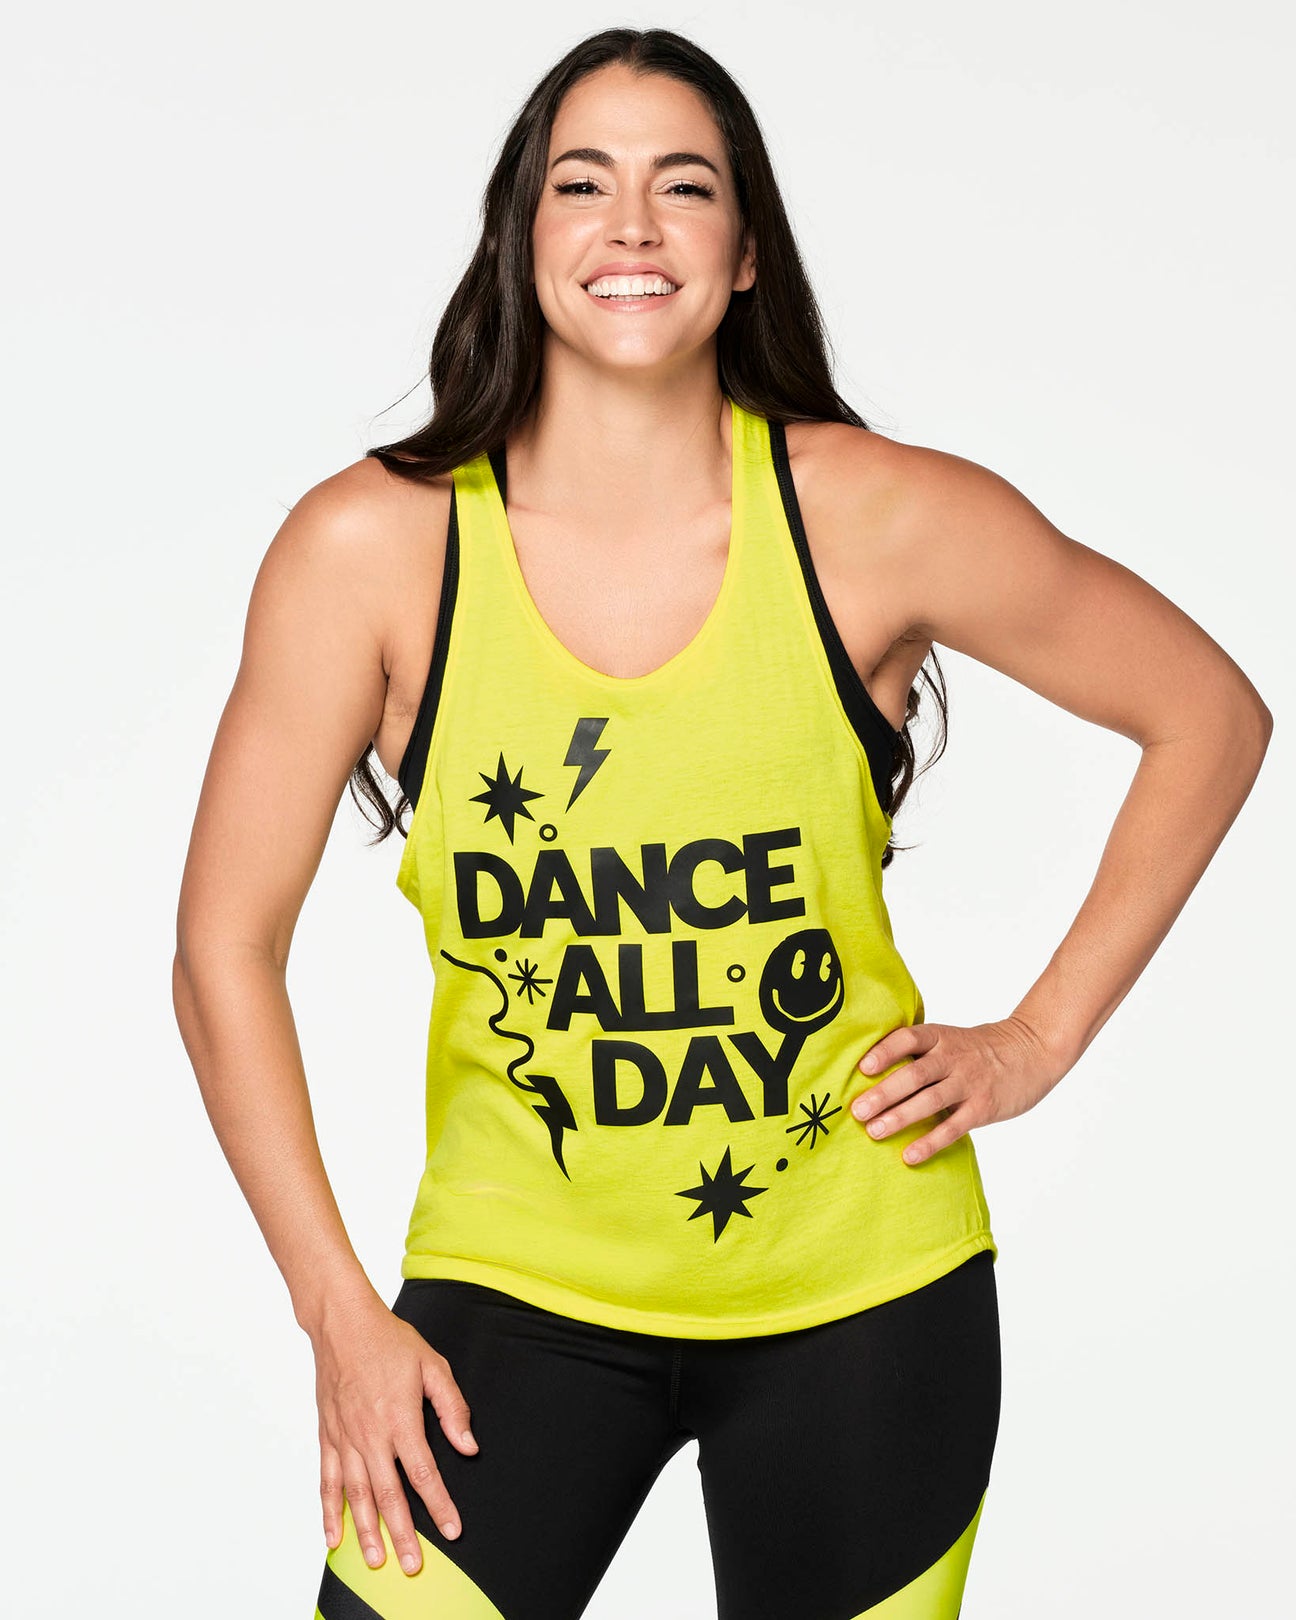 Workout Collection, Women's Ideal Racerback Tank, Zumba Workout, Dance, Tops,  Color, Smile, I Love Zumba, Zumba Outfit, Zumba Christmas 